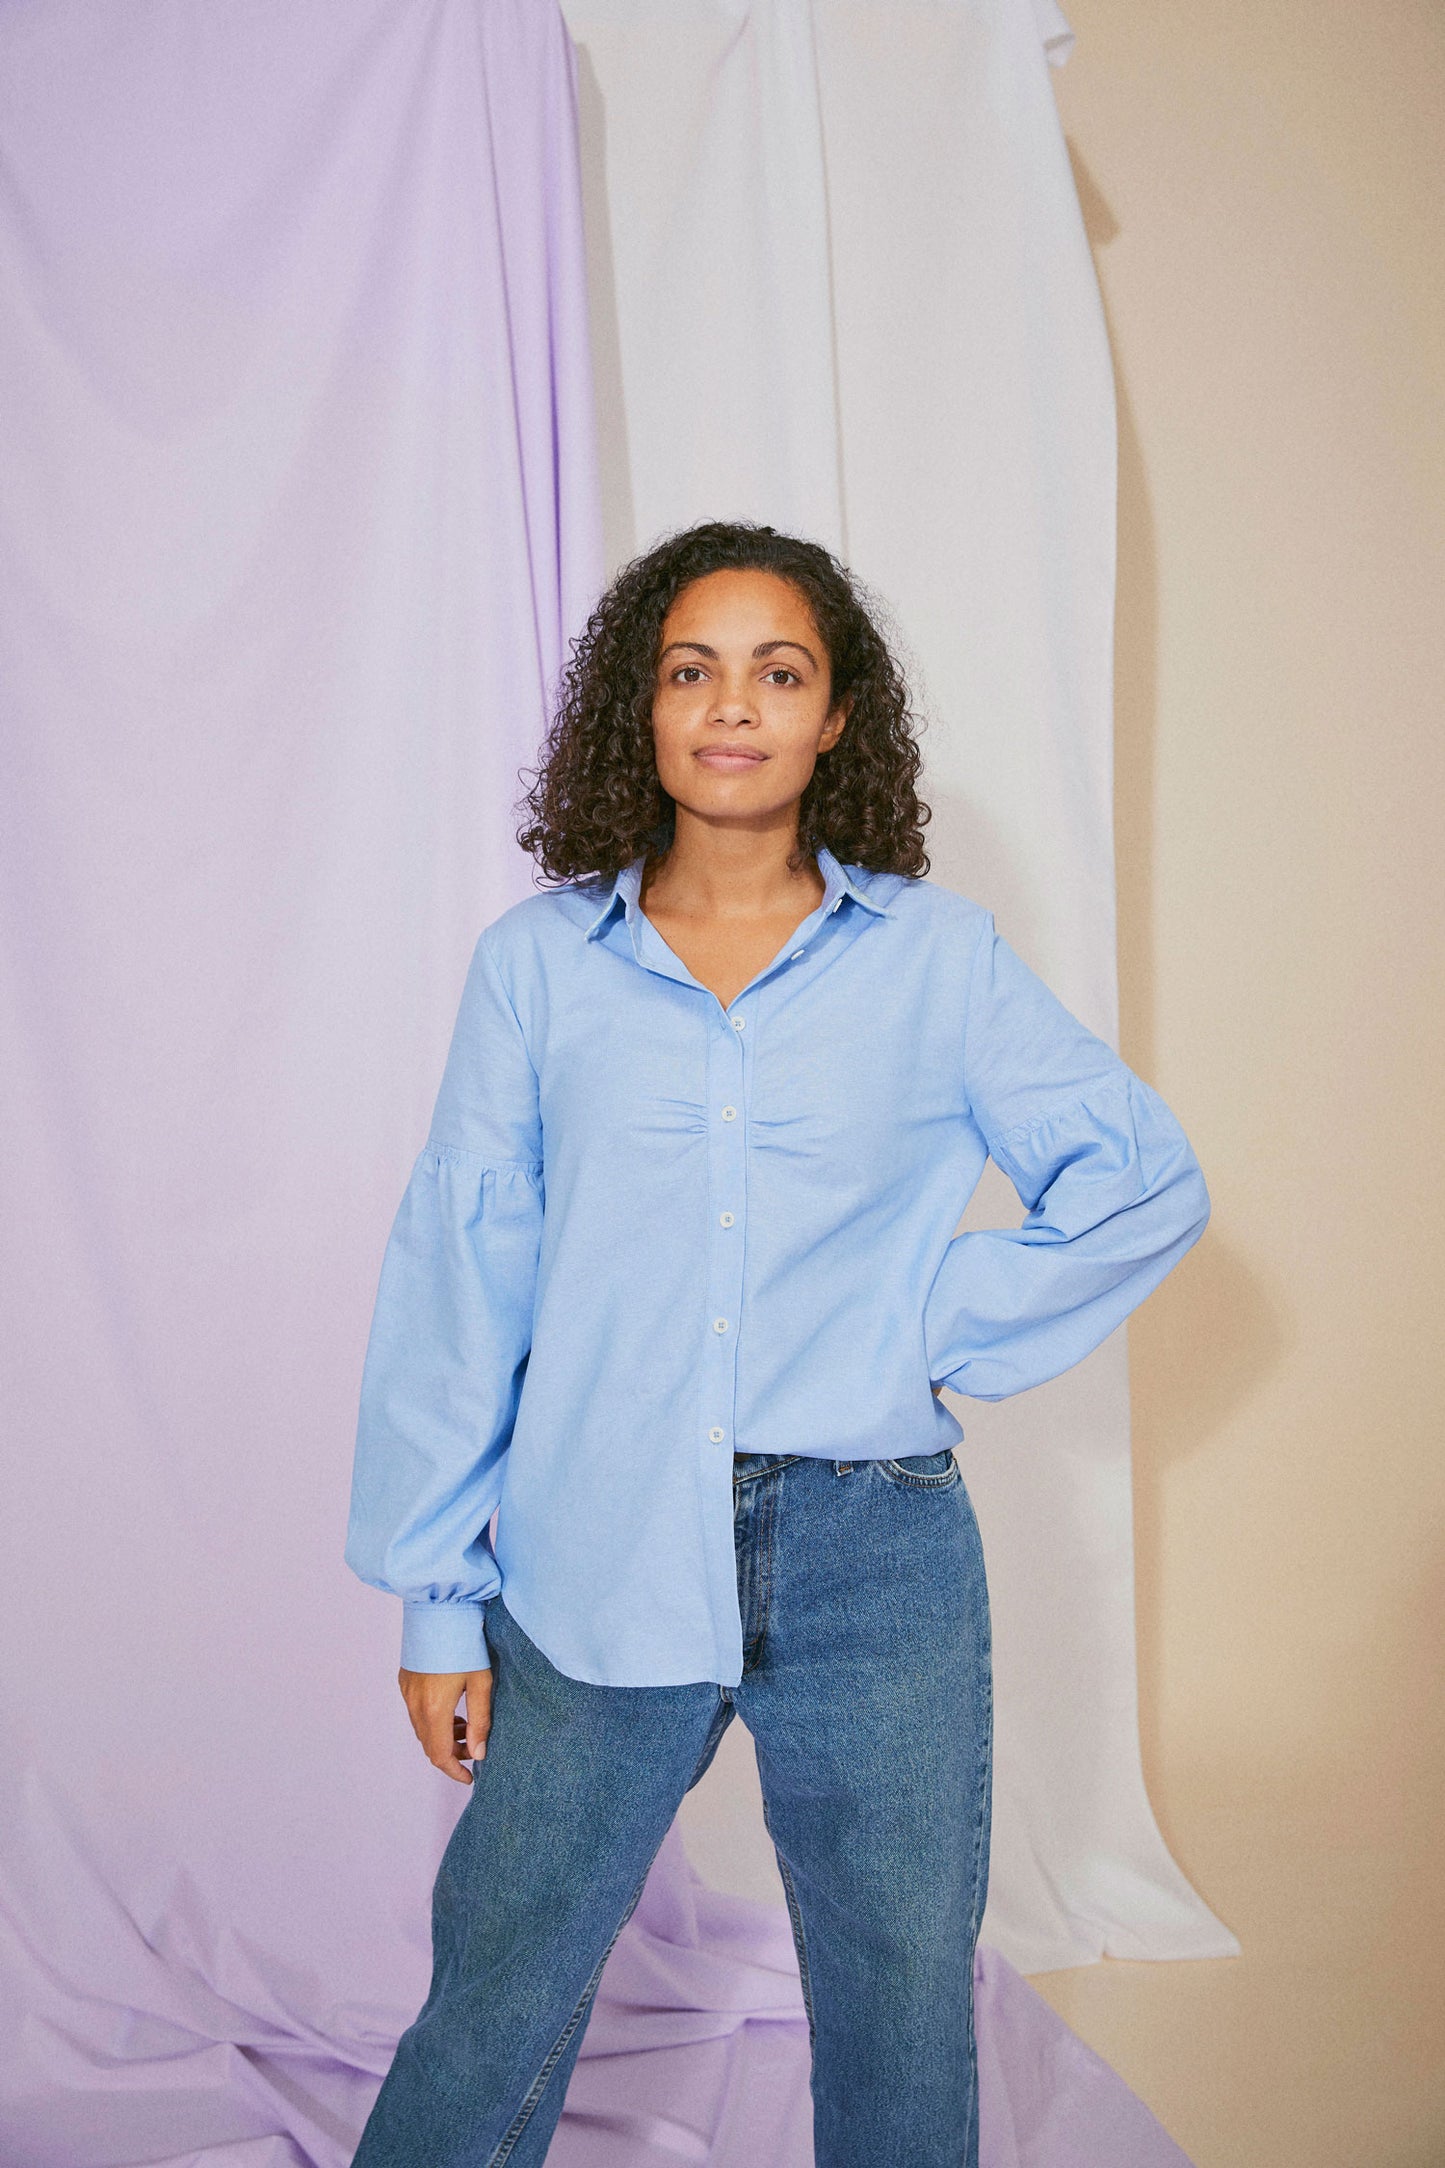 Womens pale blue shirt in recycled cotton, with lace collar trims, volume sleeves, and soft gathers at the bust, worn with jeans, half tucked